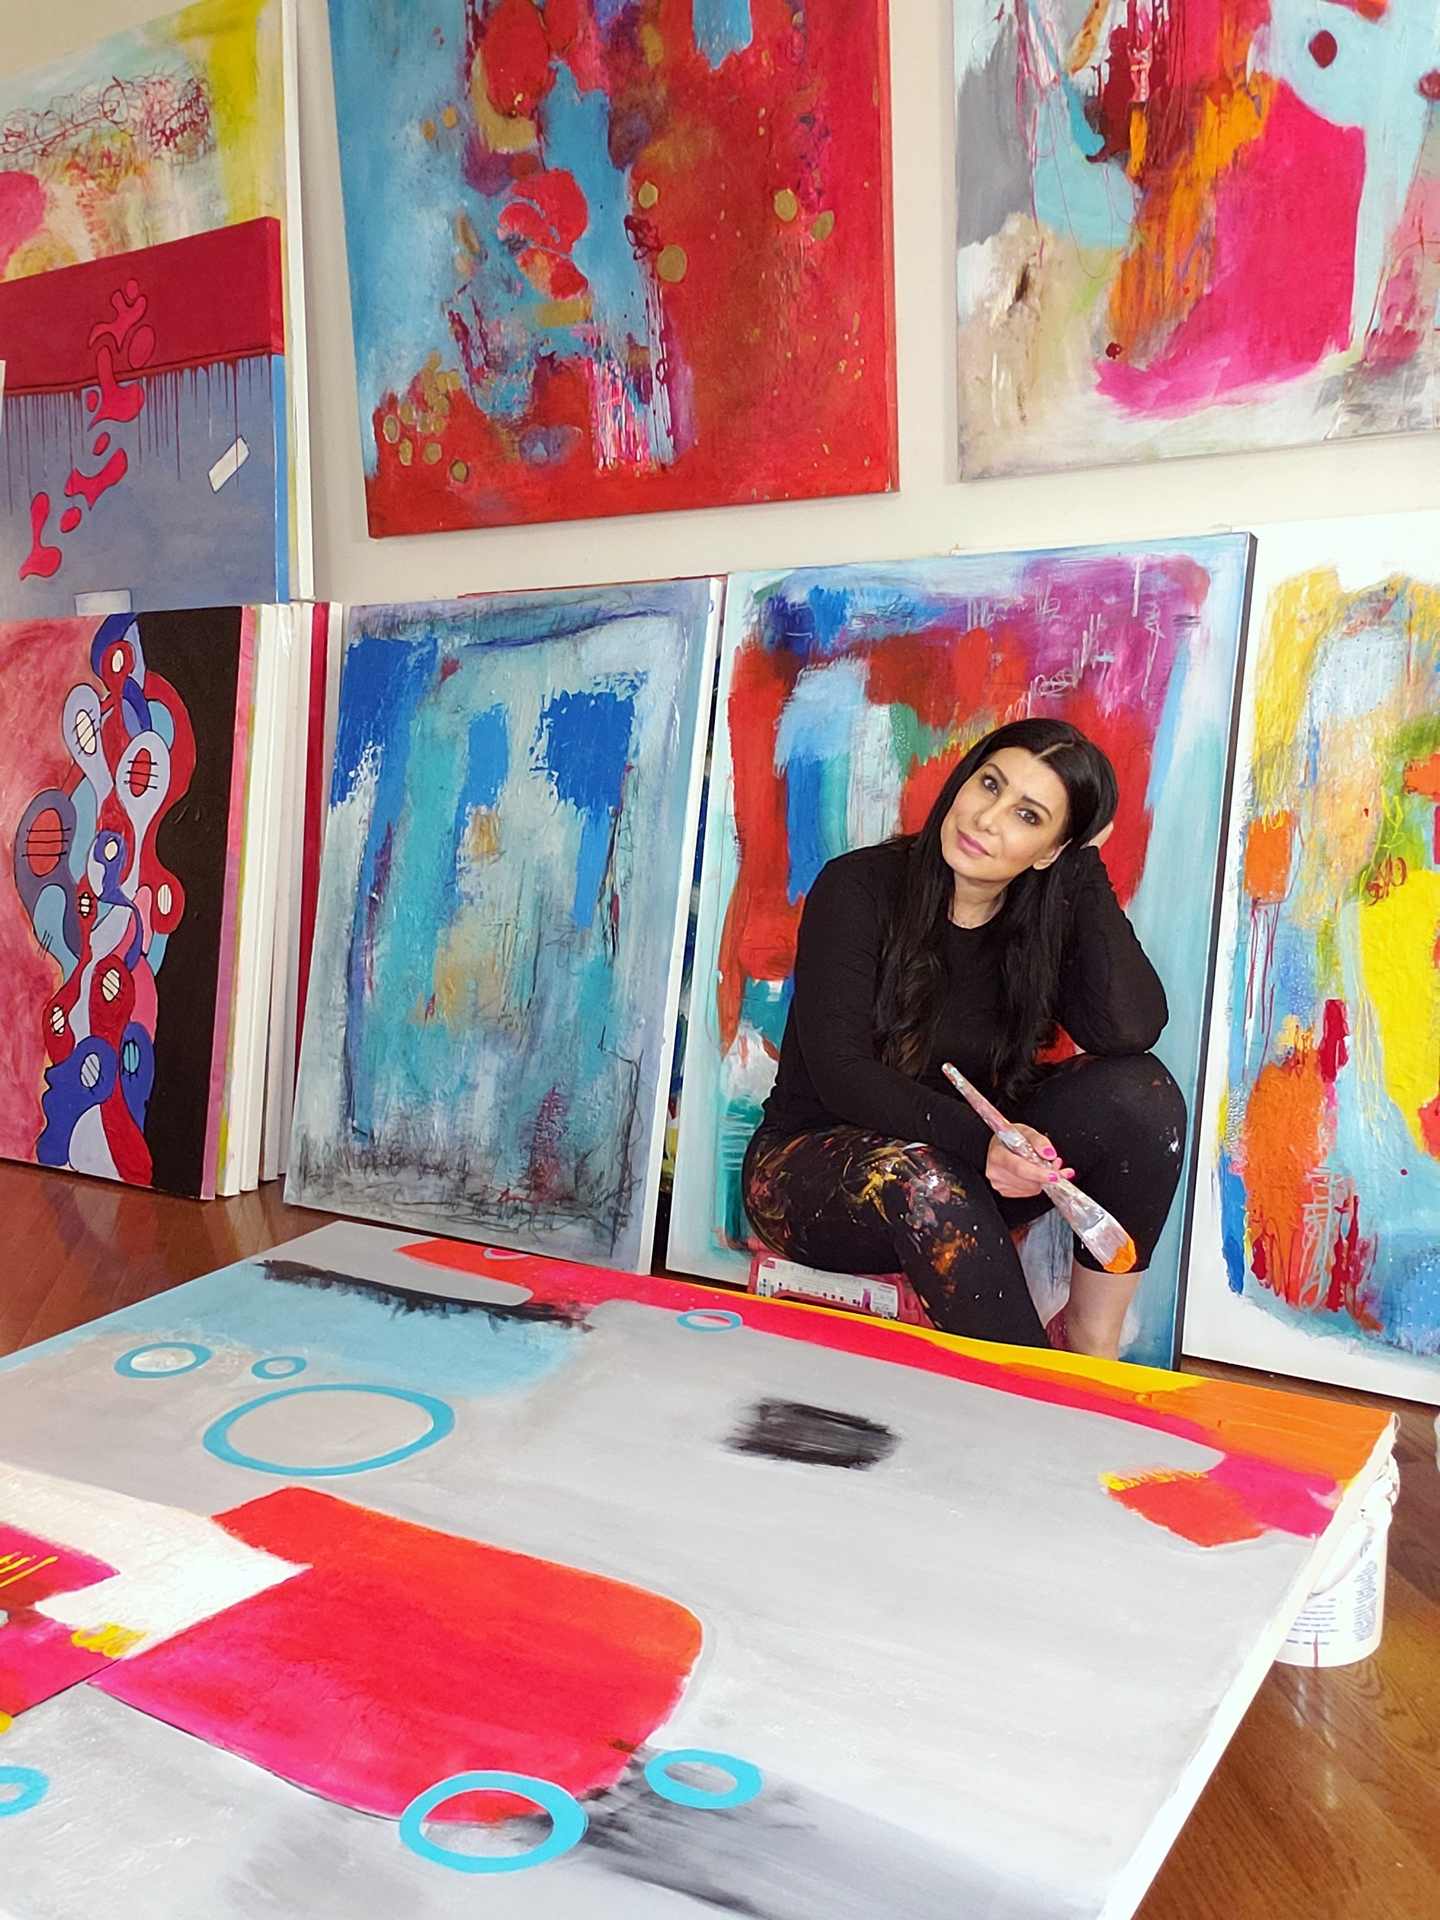 Artist Hiba Alyawer poses in front of brightly colored canvases in a studio